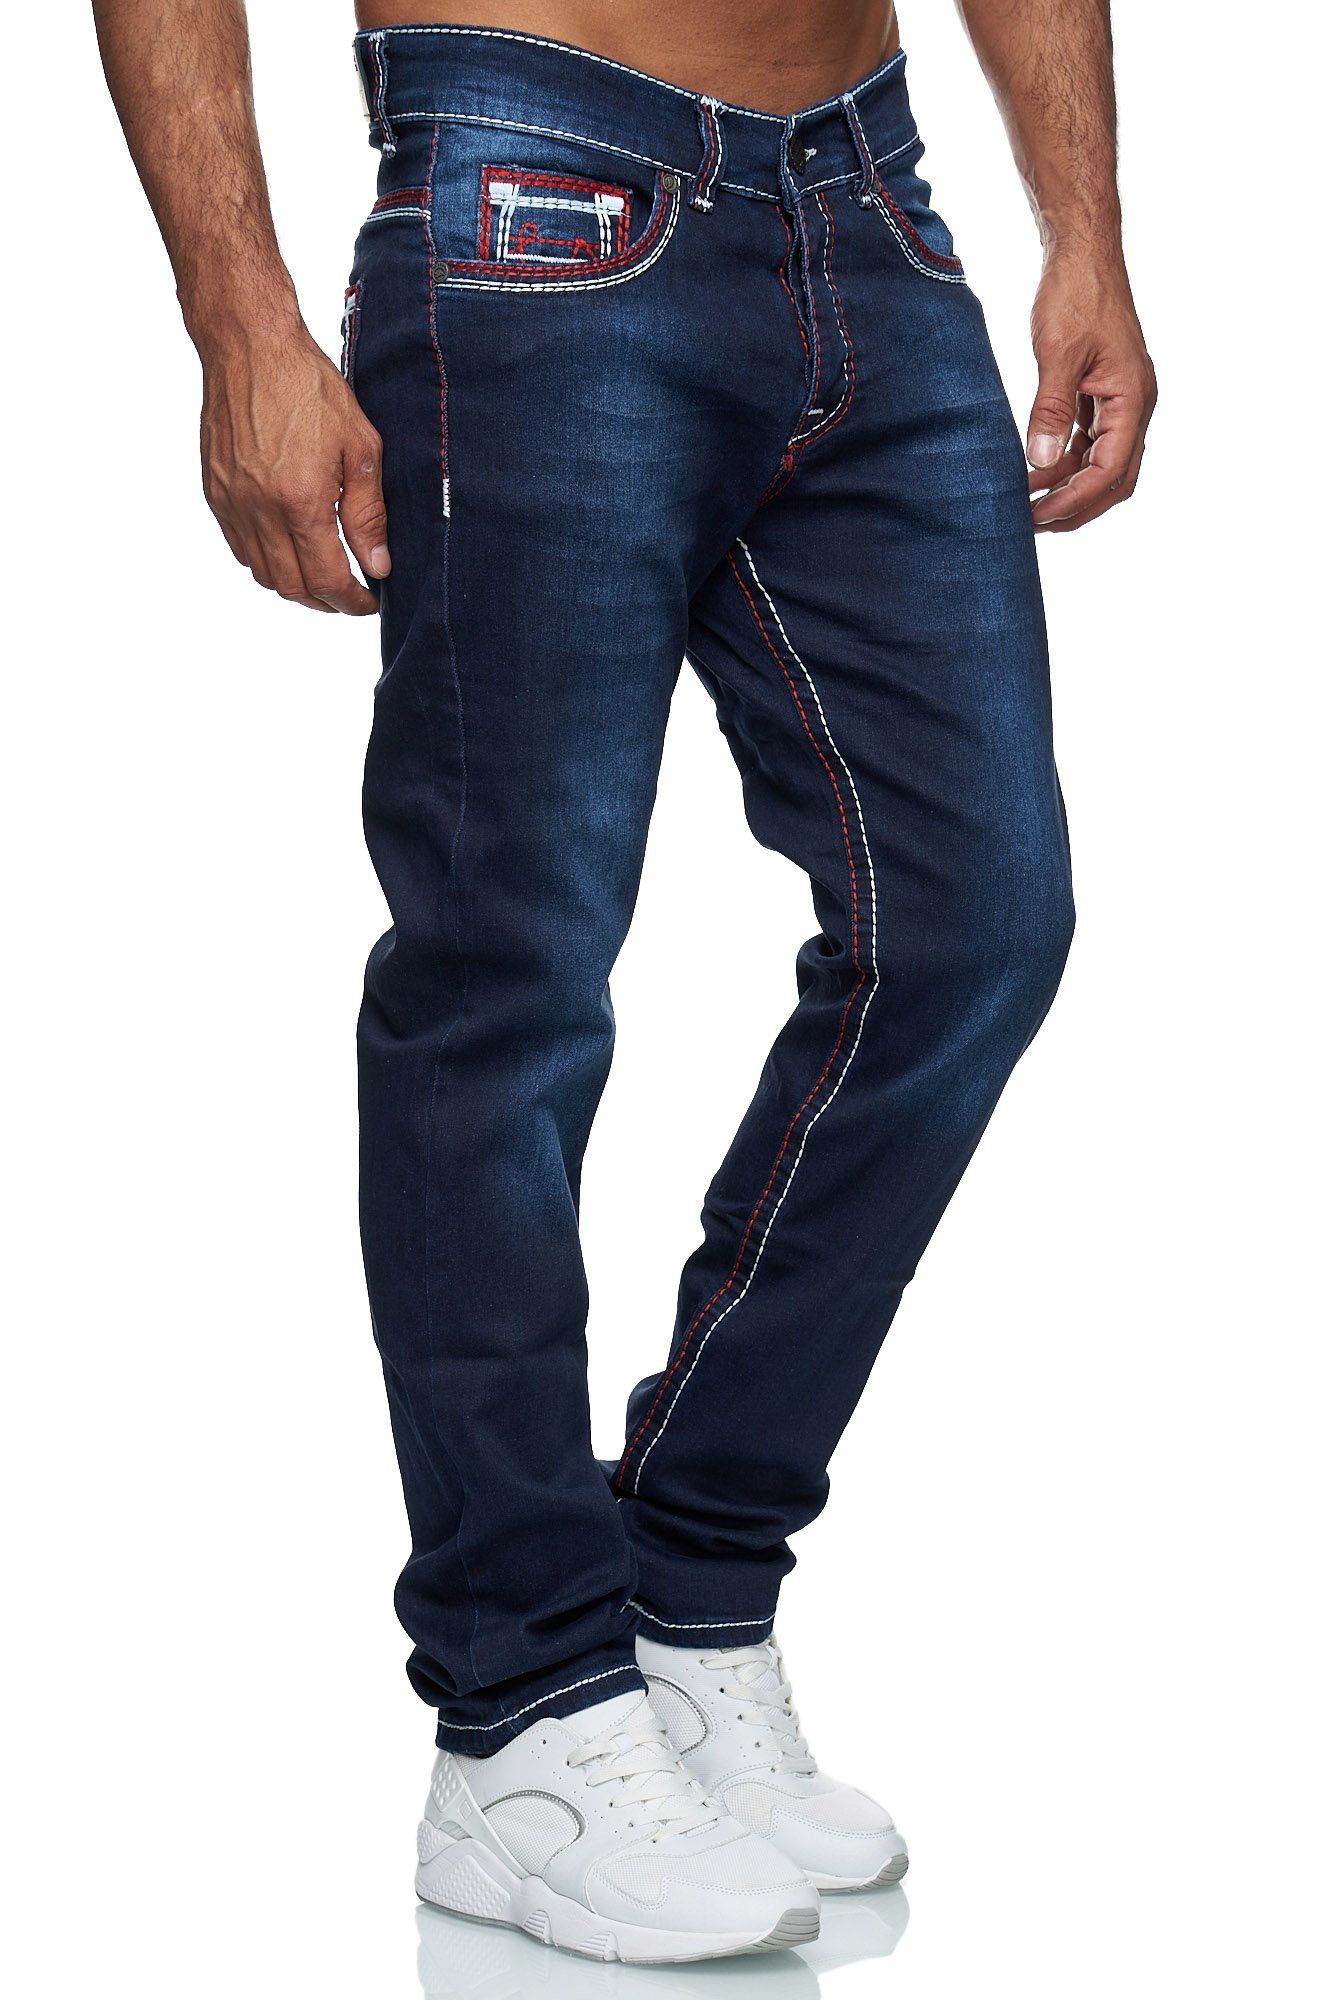 Baxboy Regular-fit-Jeans Herren Jeans Dicke Neon-Naht Straight Fit Denim Stonewashed Stretch 20897-3 Rot | Straight-Fit Jeans